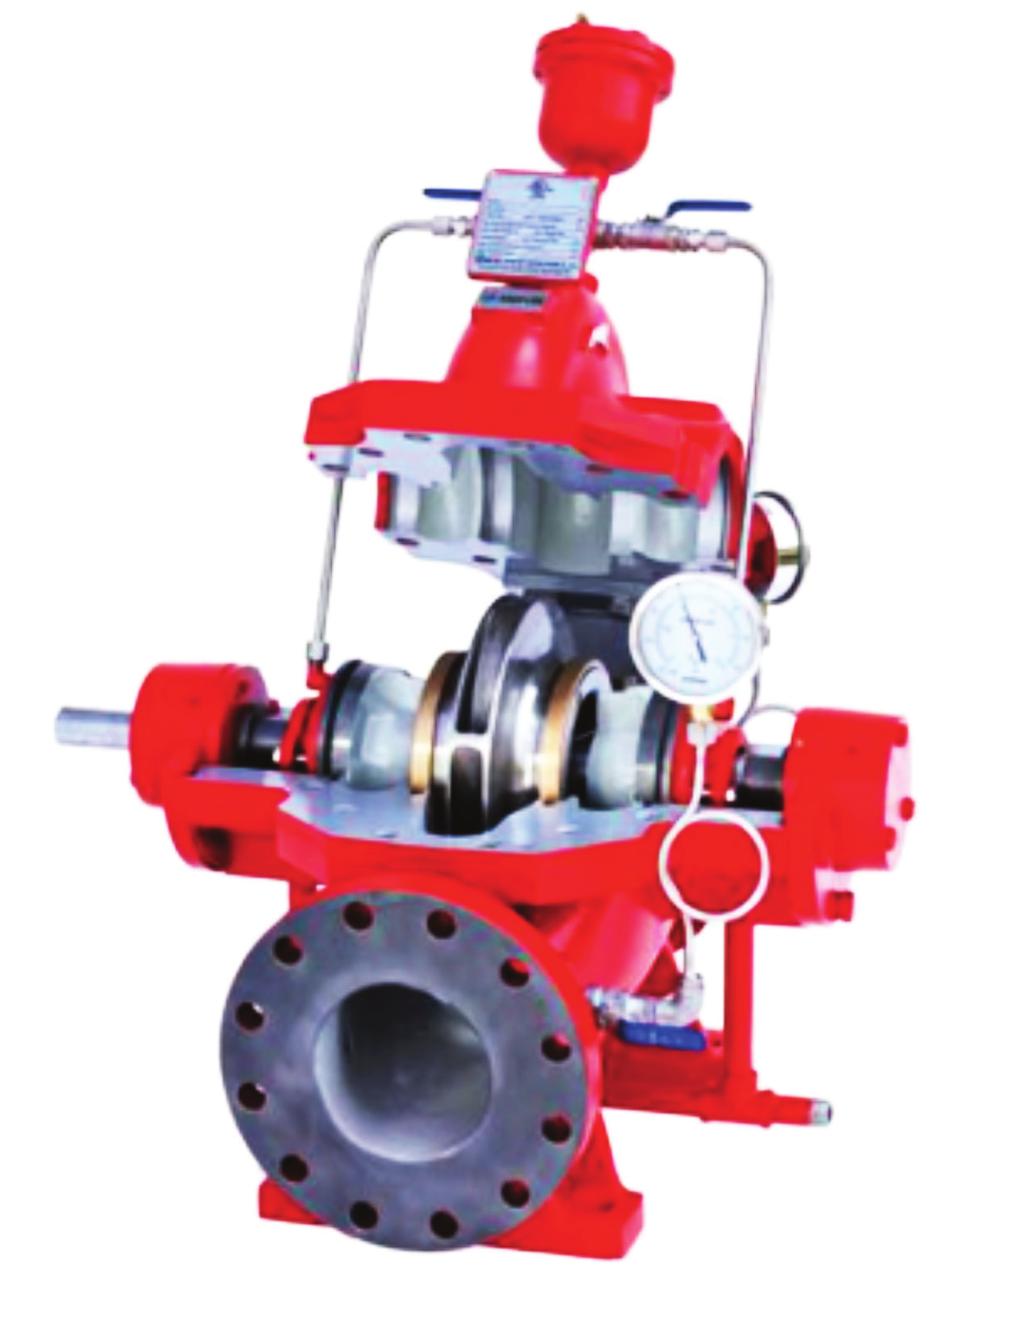 The impeller is dynamically balanced to ISO1940 and hydraulically balanced through the double suction.